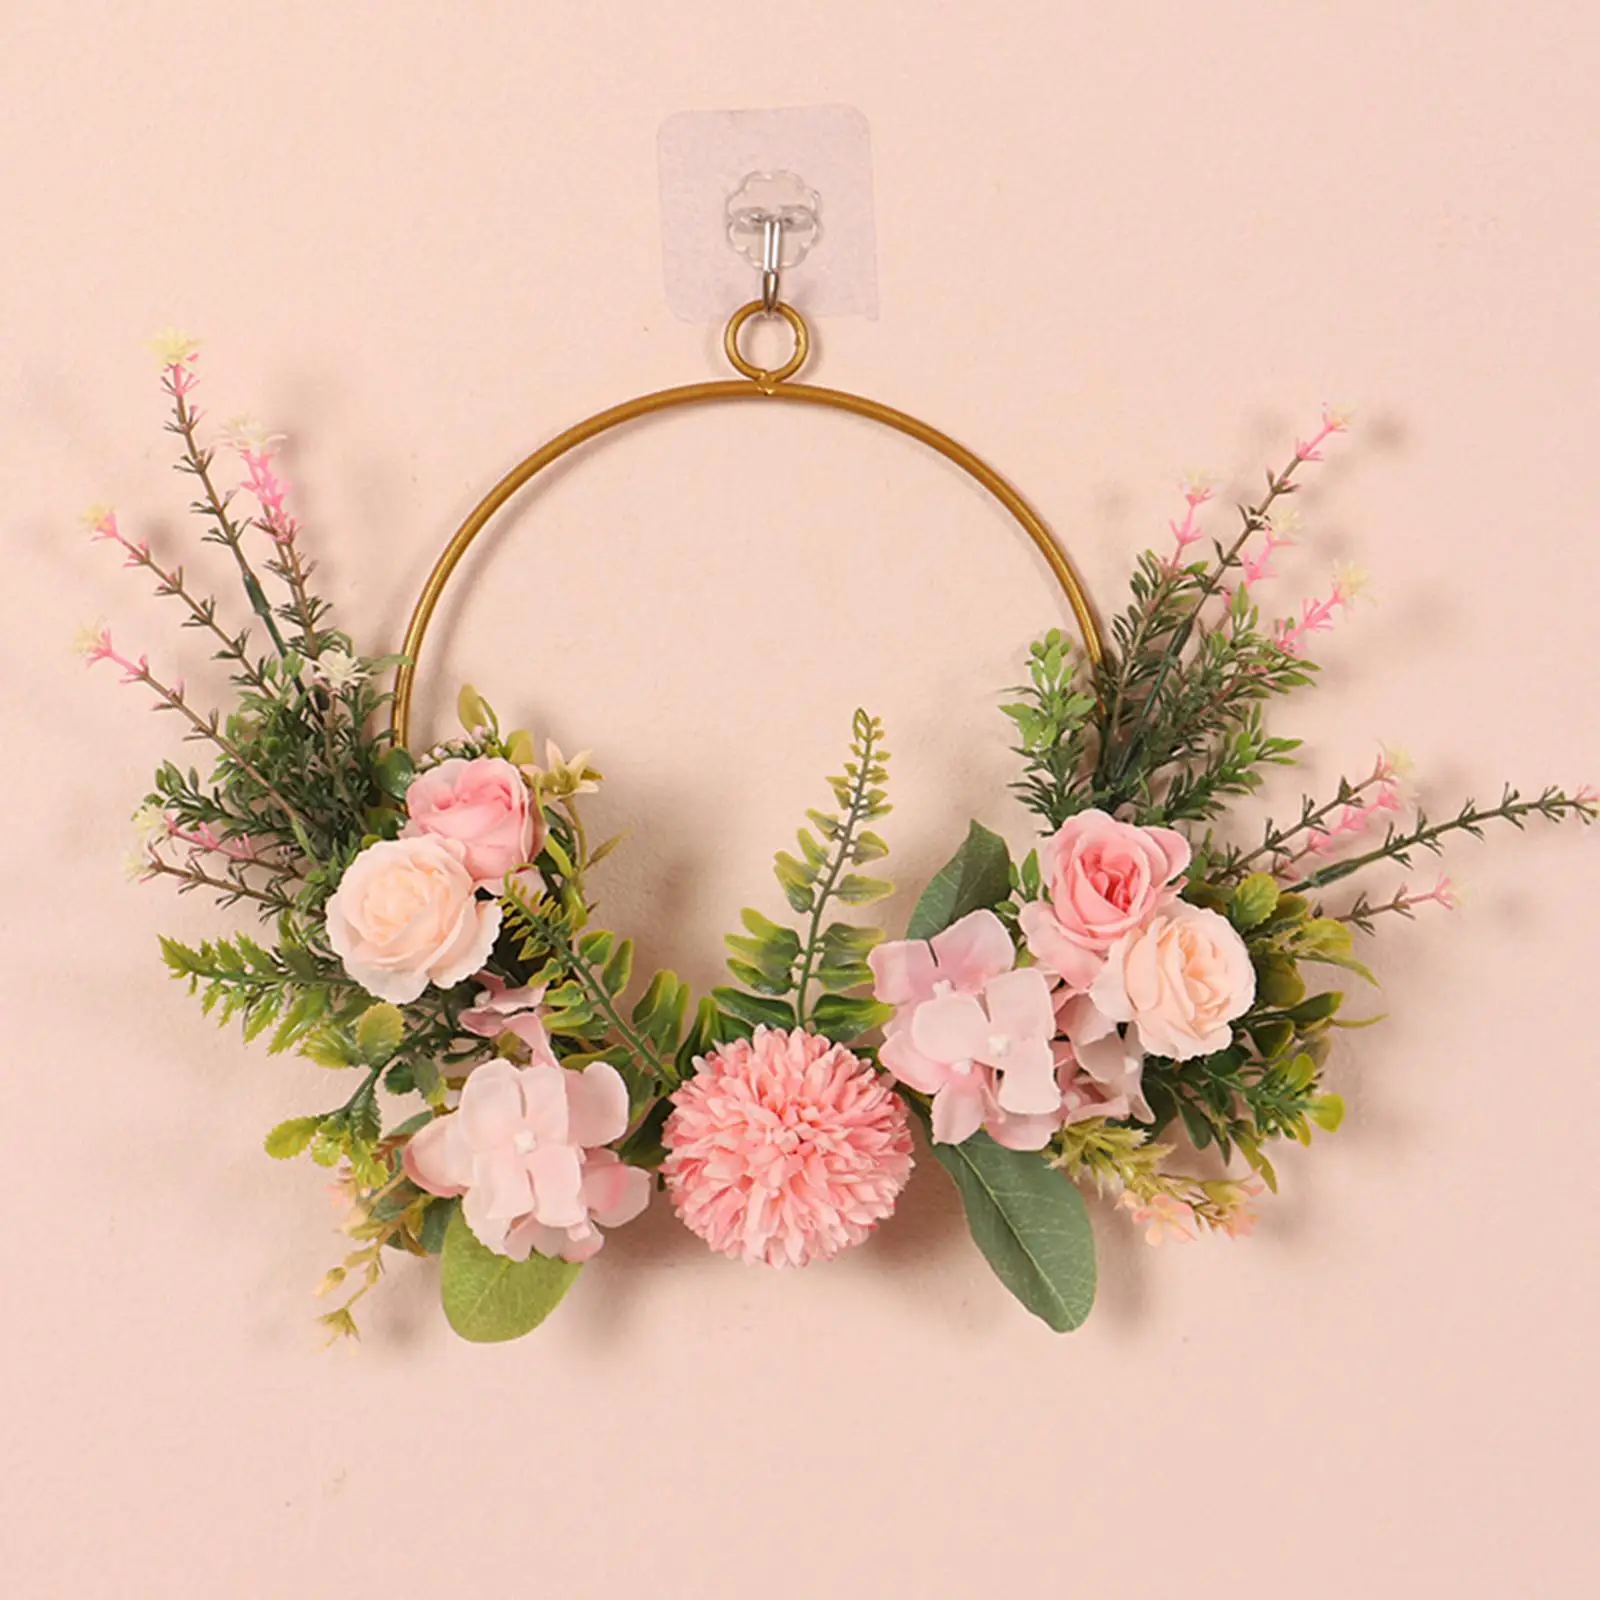 Large Floral Hoop Wreath Garland Hanging Pendant Wall Hanging Artificial  Party Decoration for  Party 